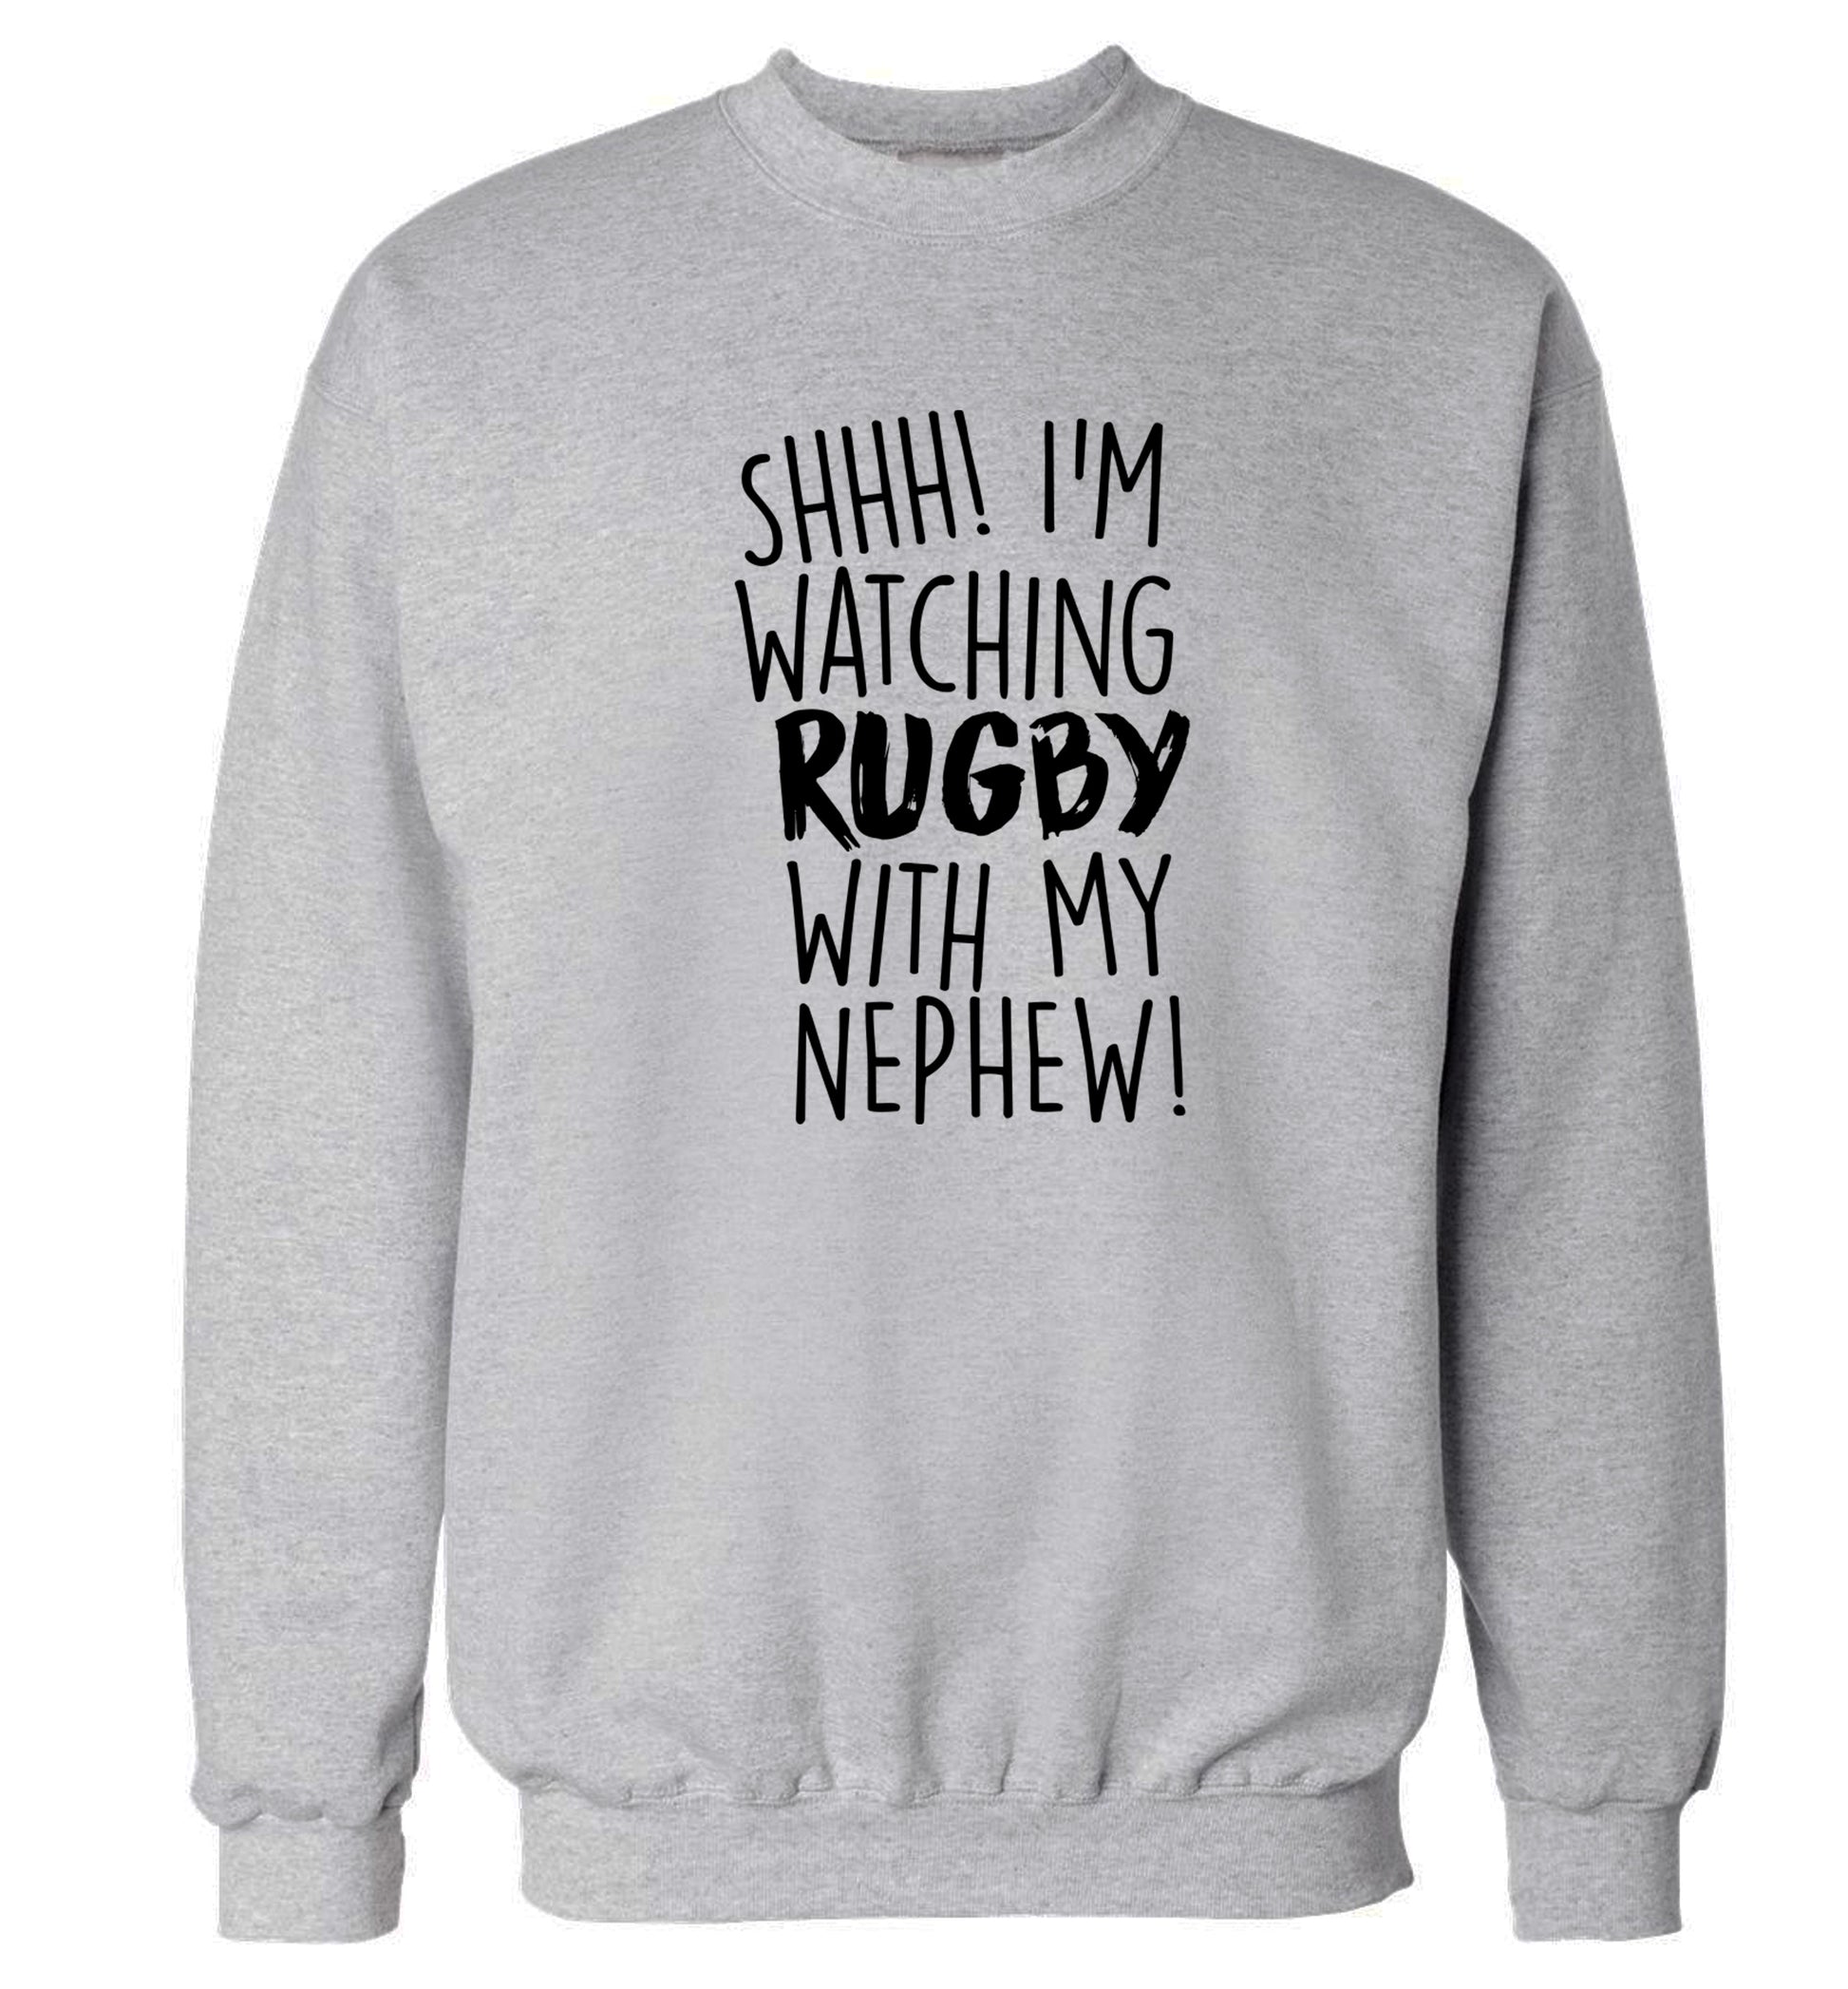 Shh.. I'm watching rugby with my nephew Adult's unisex grey Sweater 2XL